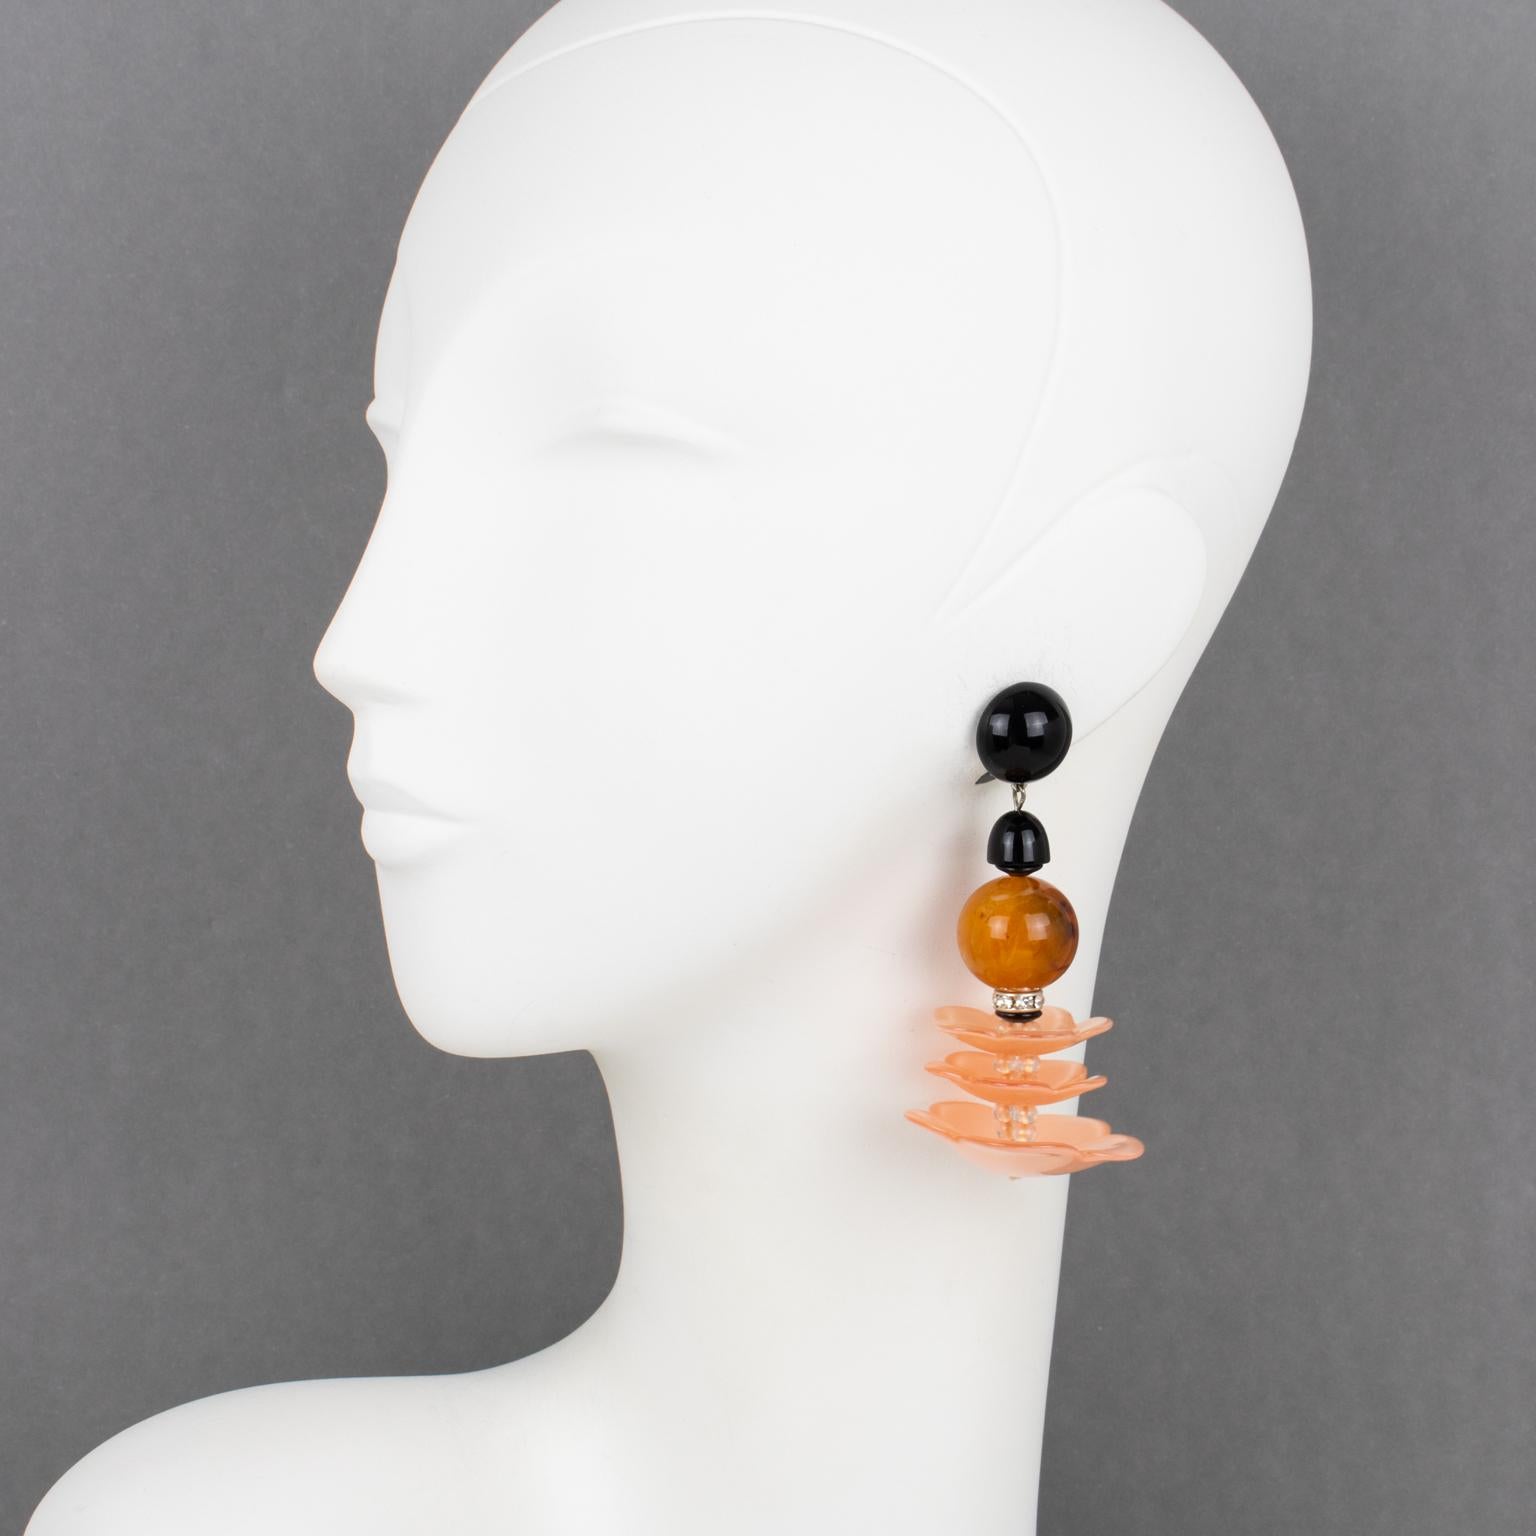 These stunning Angela Caputi, made-in-Italy resin clip-on earrings feature a massive dangling design with wavy-shaped elements. The pieces boast pink salmon, amber marble, and black colors. These earrings are from the Flamenco collection. Her color